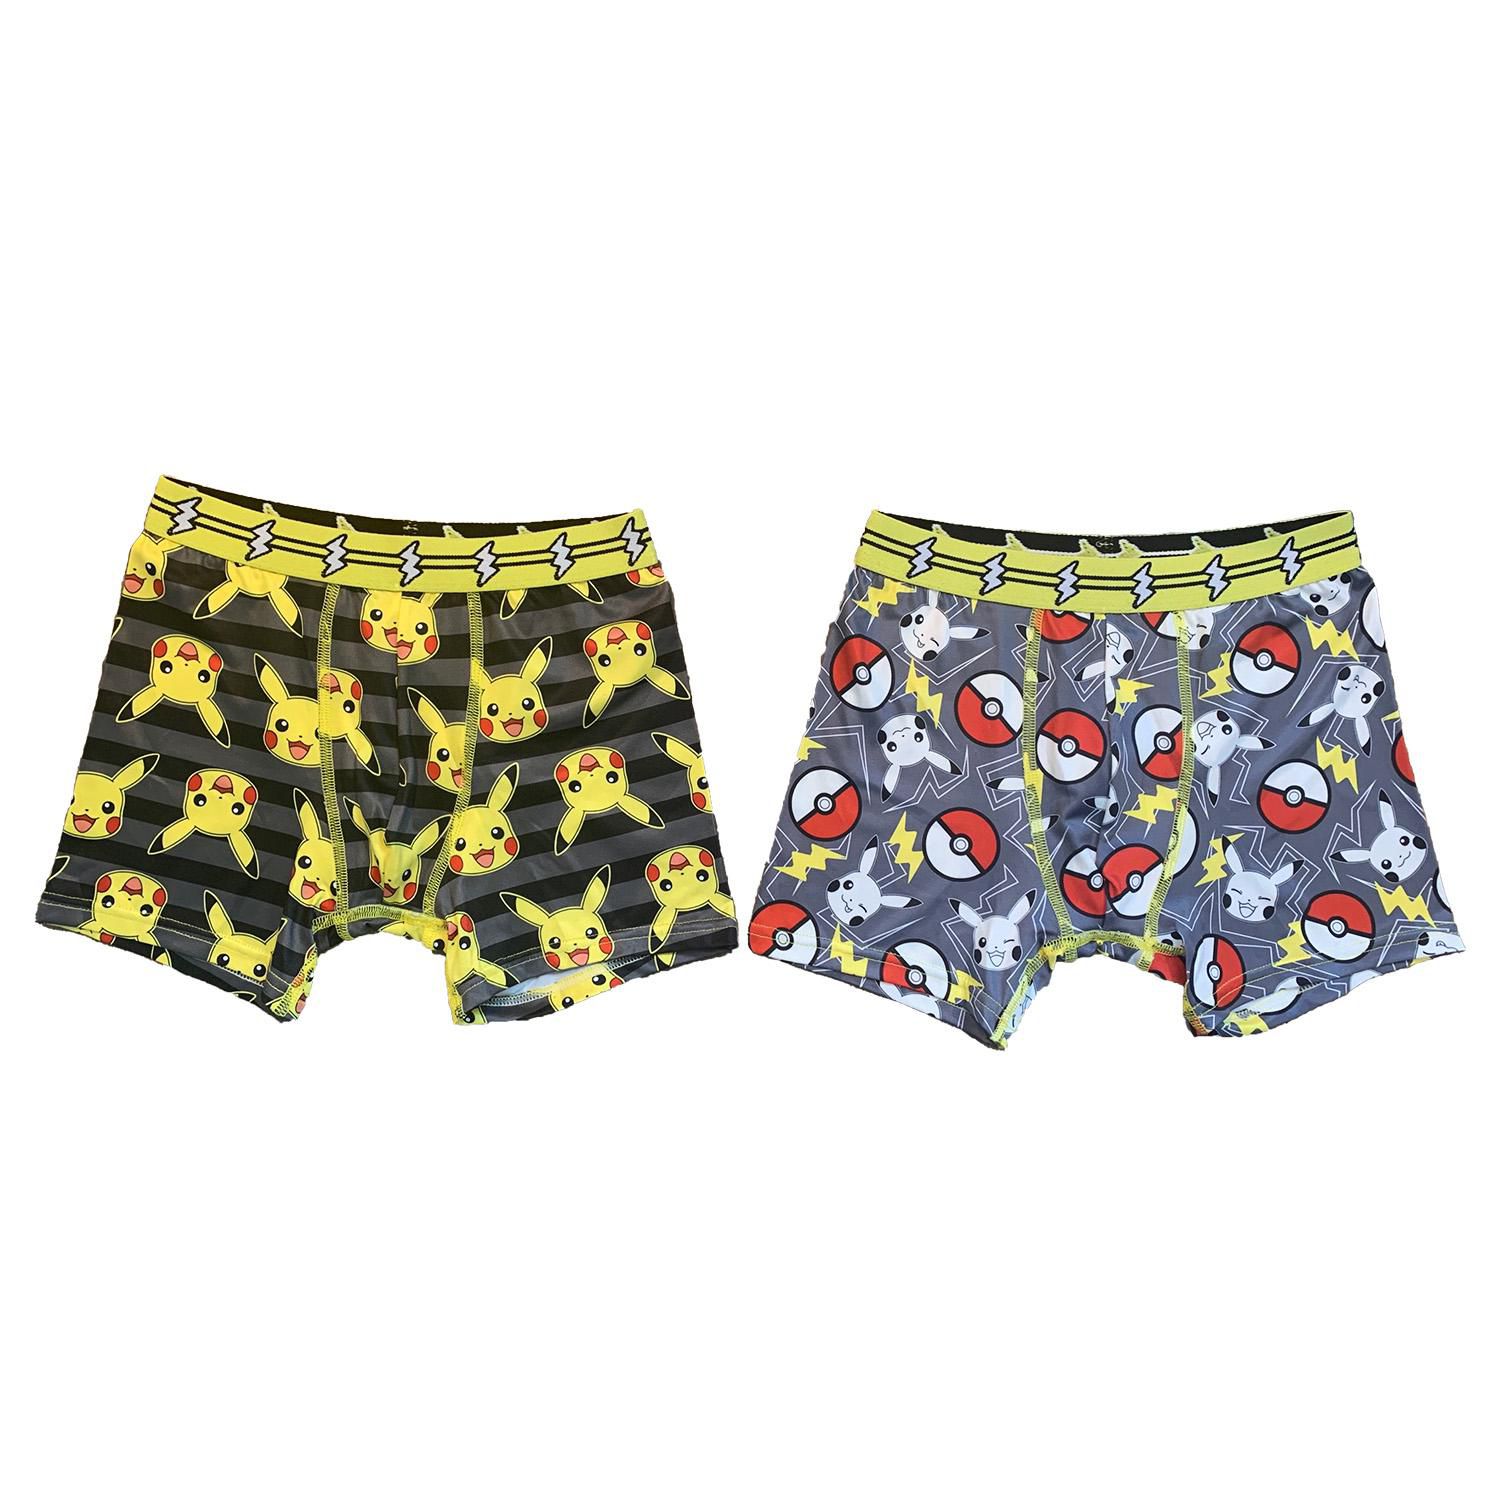  Pokemon Underwear for Boys and Teenagers - Soft